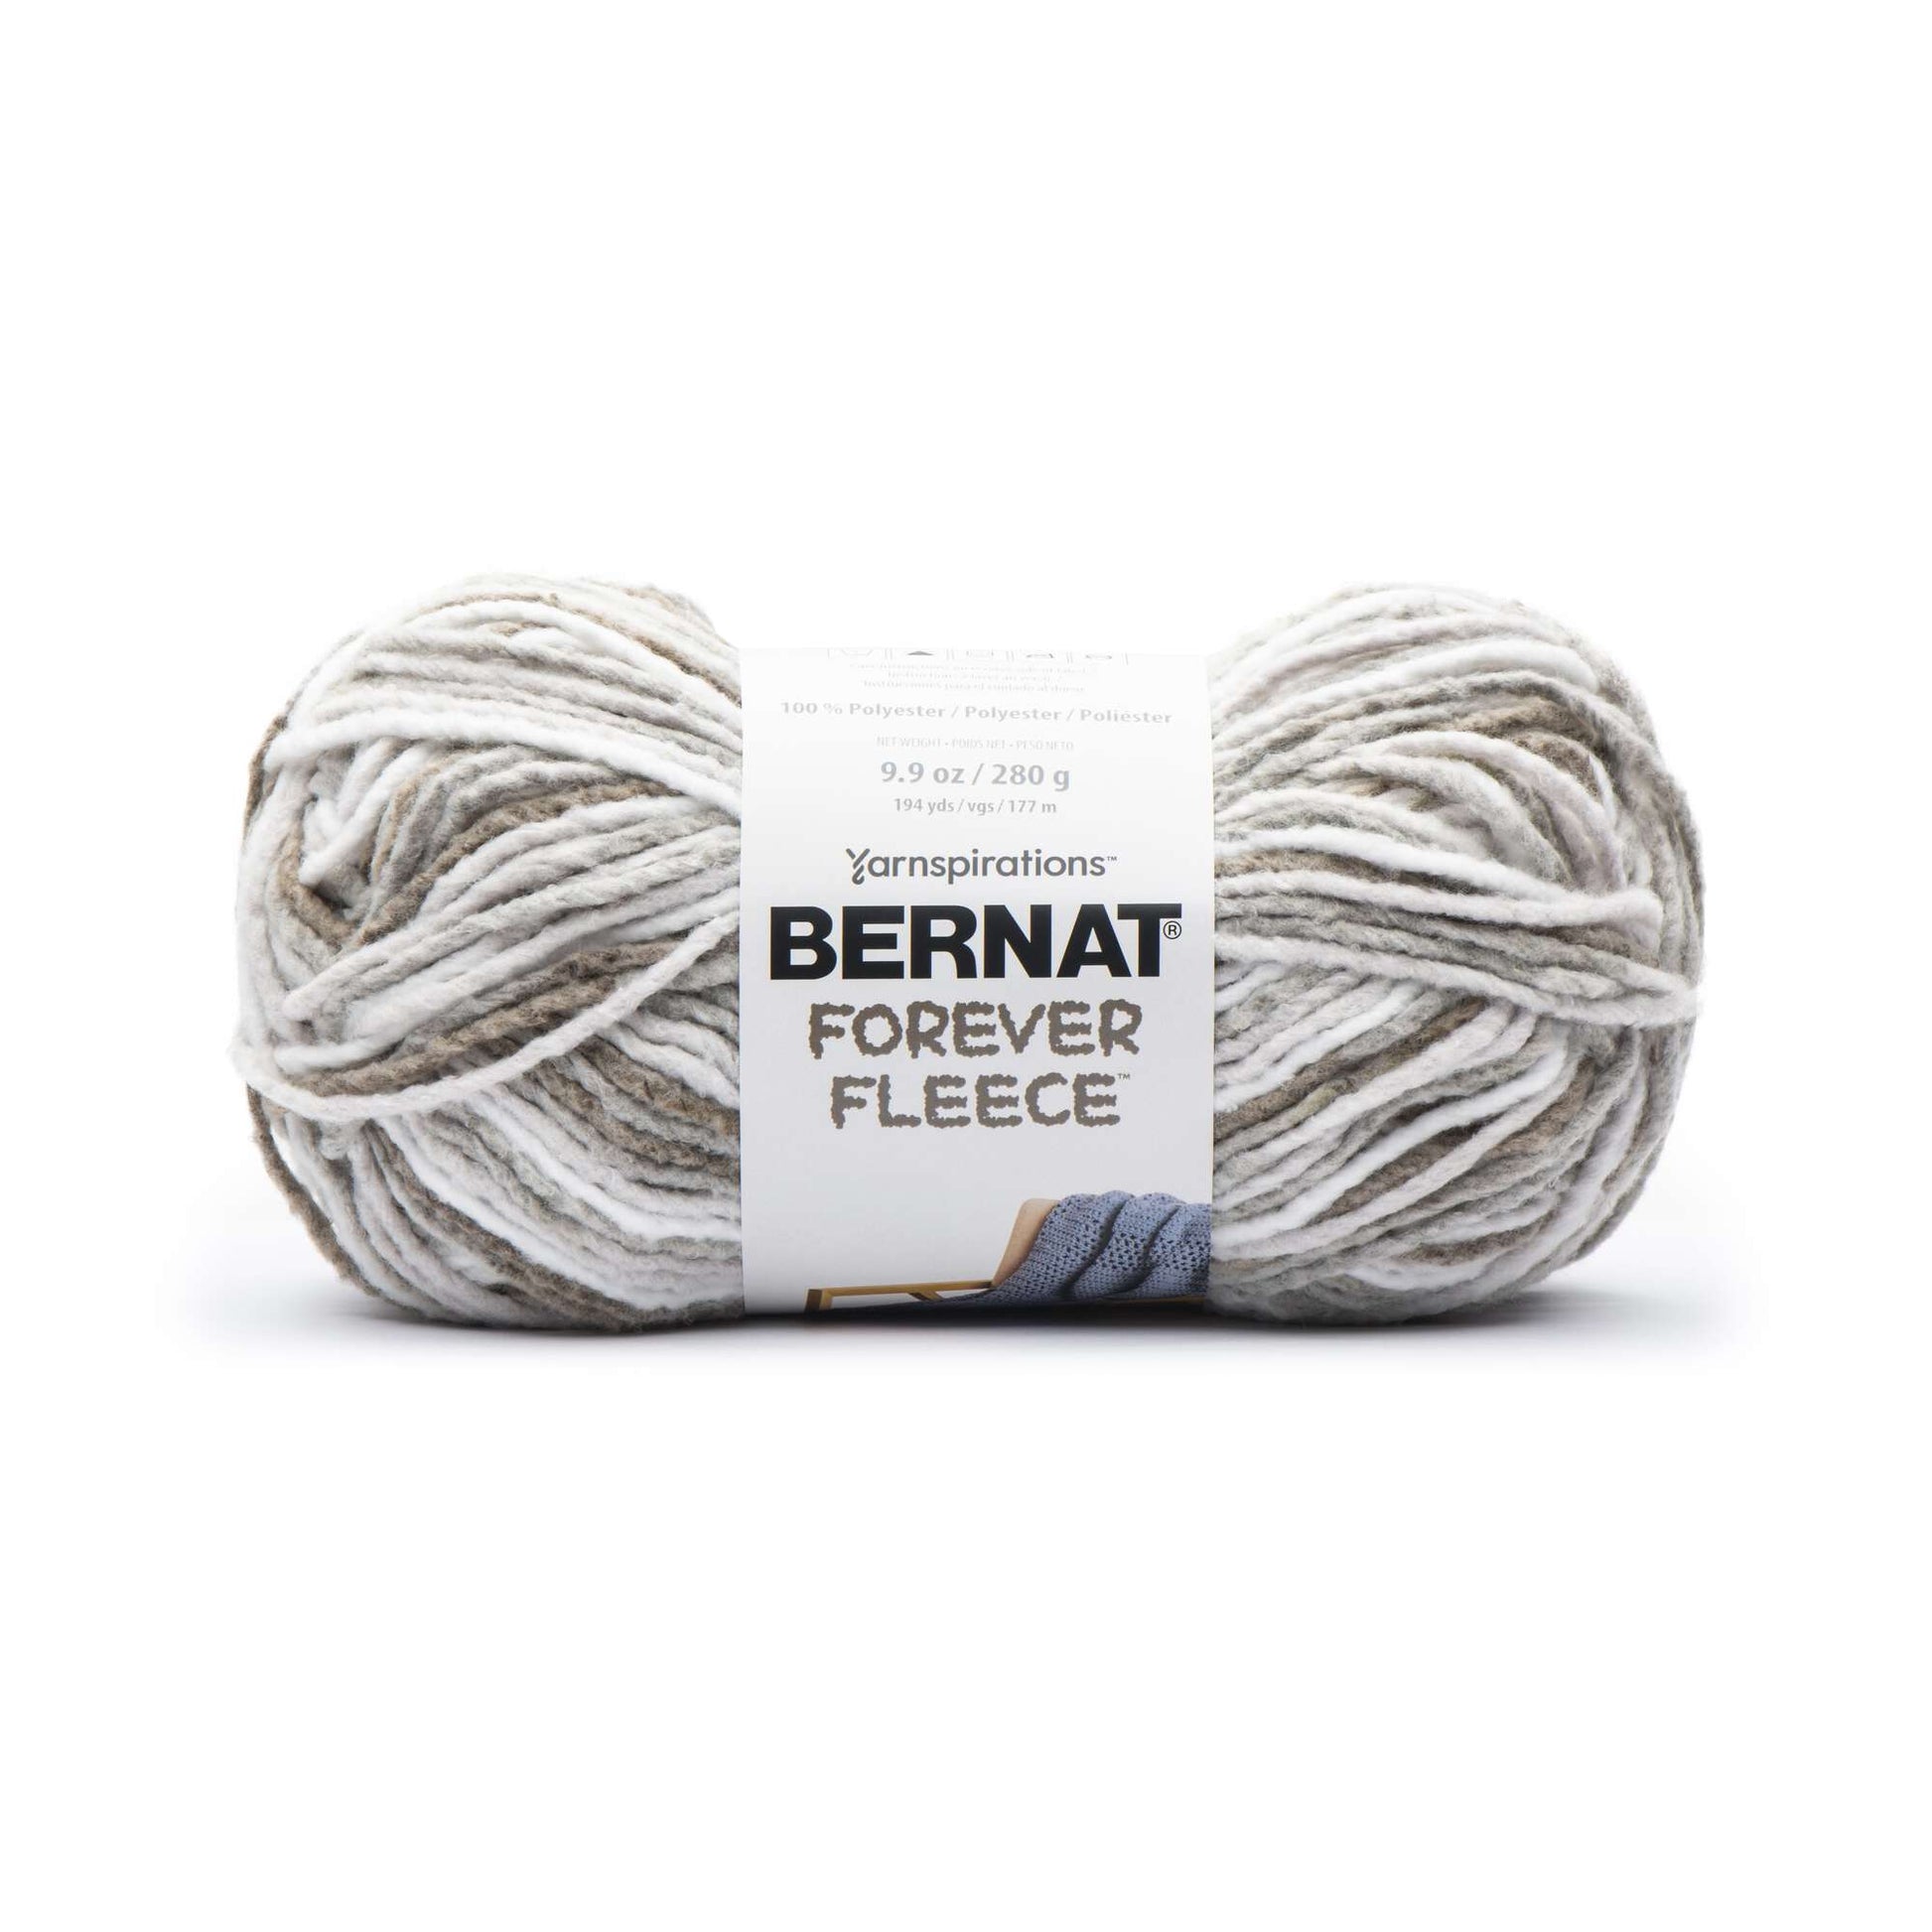 Stitches that work well with Bernat Forever Fleece Finer 